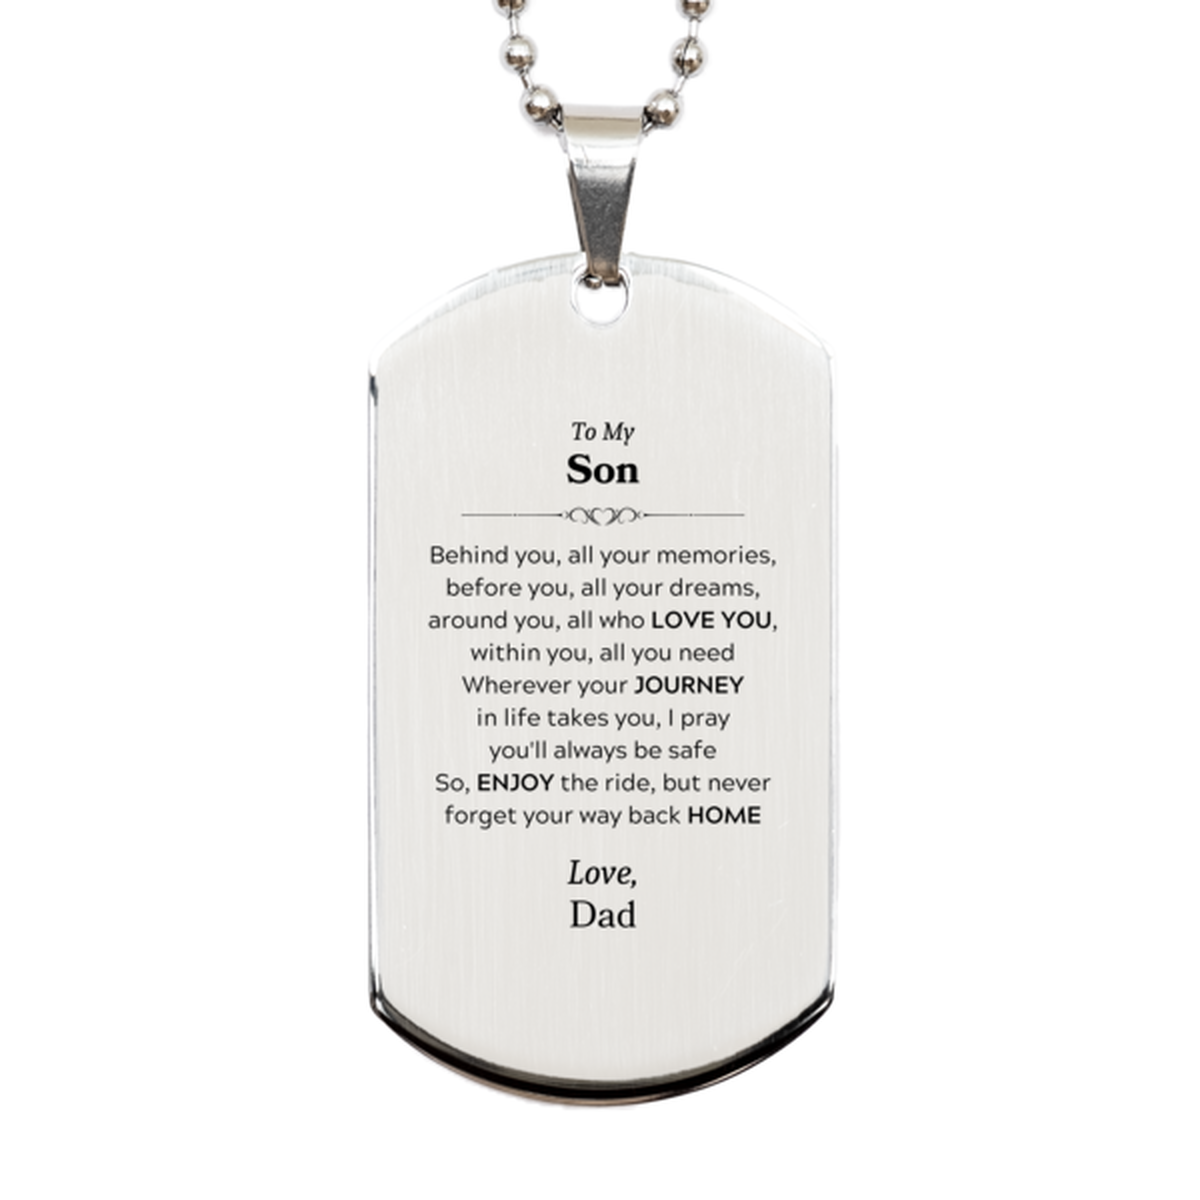 To My Son Graduation Gifts from Dad, Son Silver Dog Tag Christmas Birthday Gifts for Son Behind you, all your memories, before you, all your dreams. Love, Dad